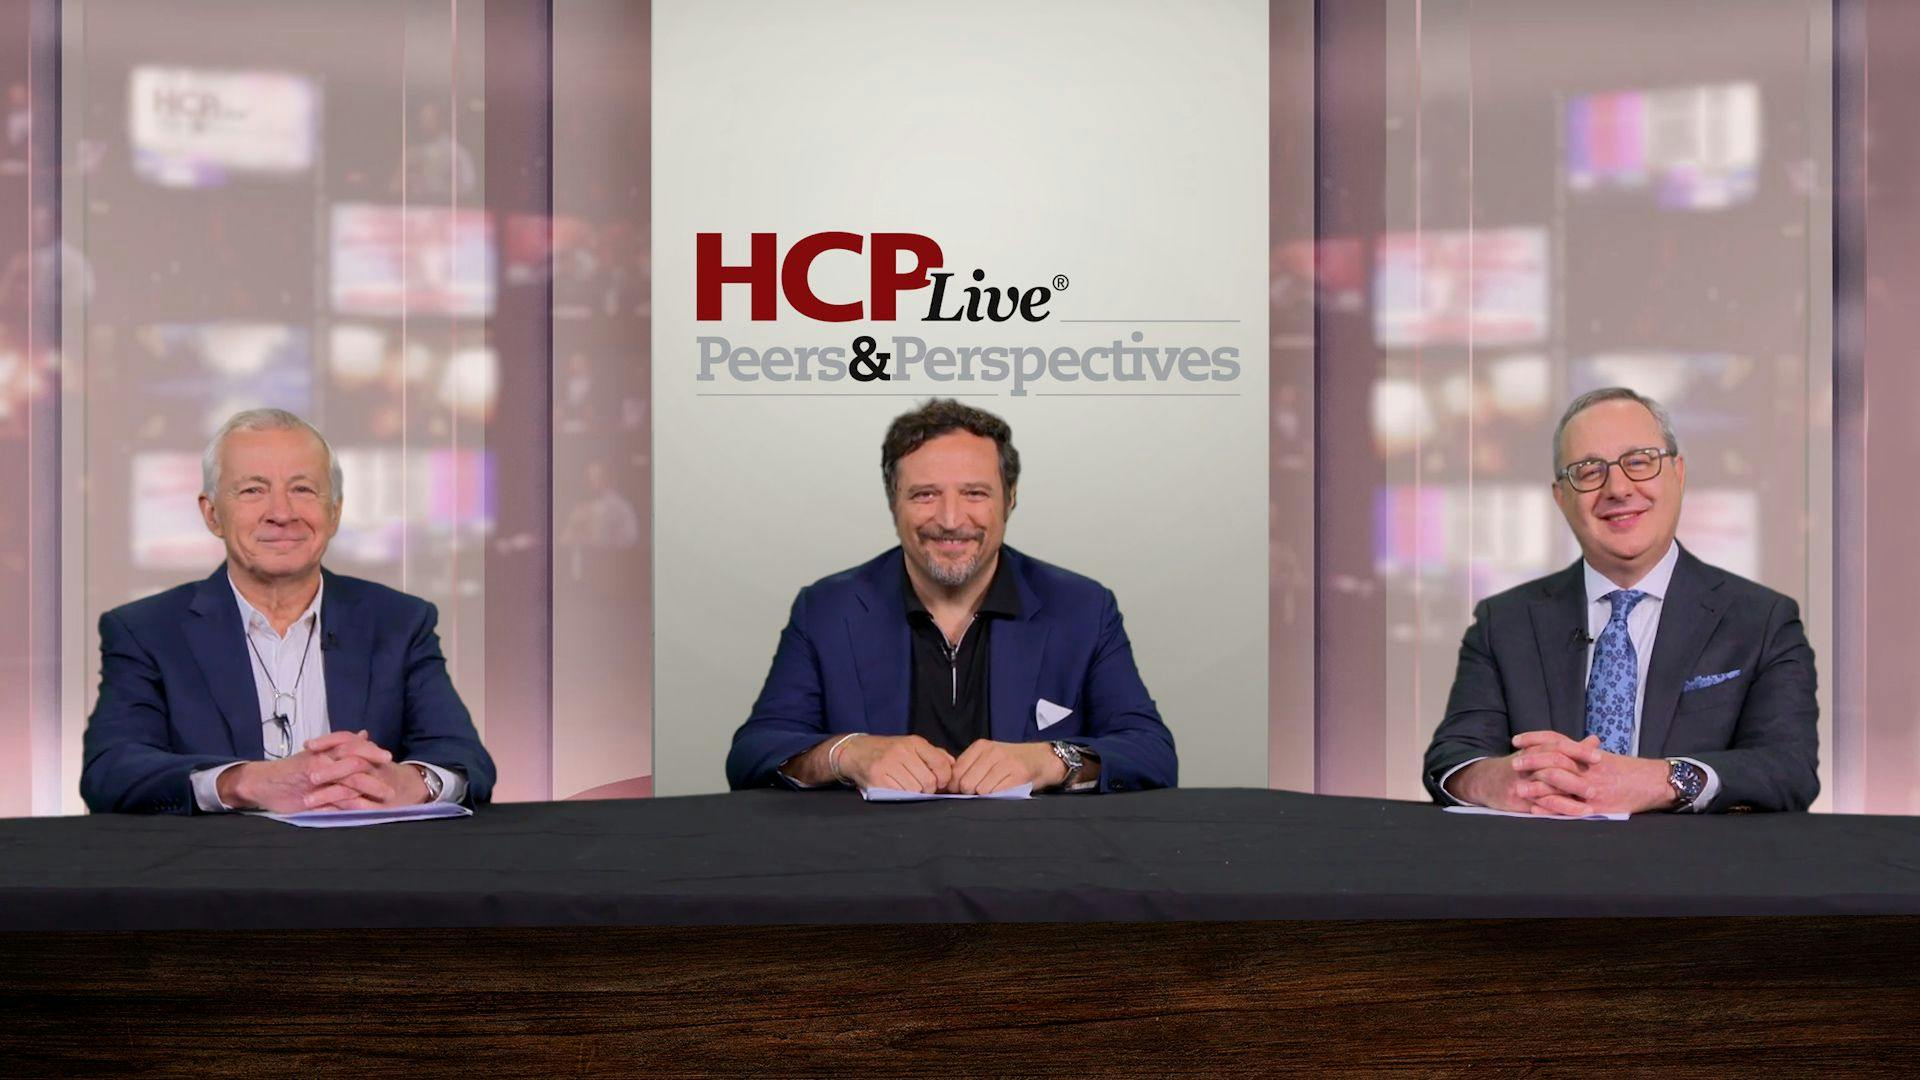 HCP Live - Peers & Perspectives - featuring 3 KOLs in, "Achieving Targeted Treatment Outcomes in IBD"